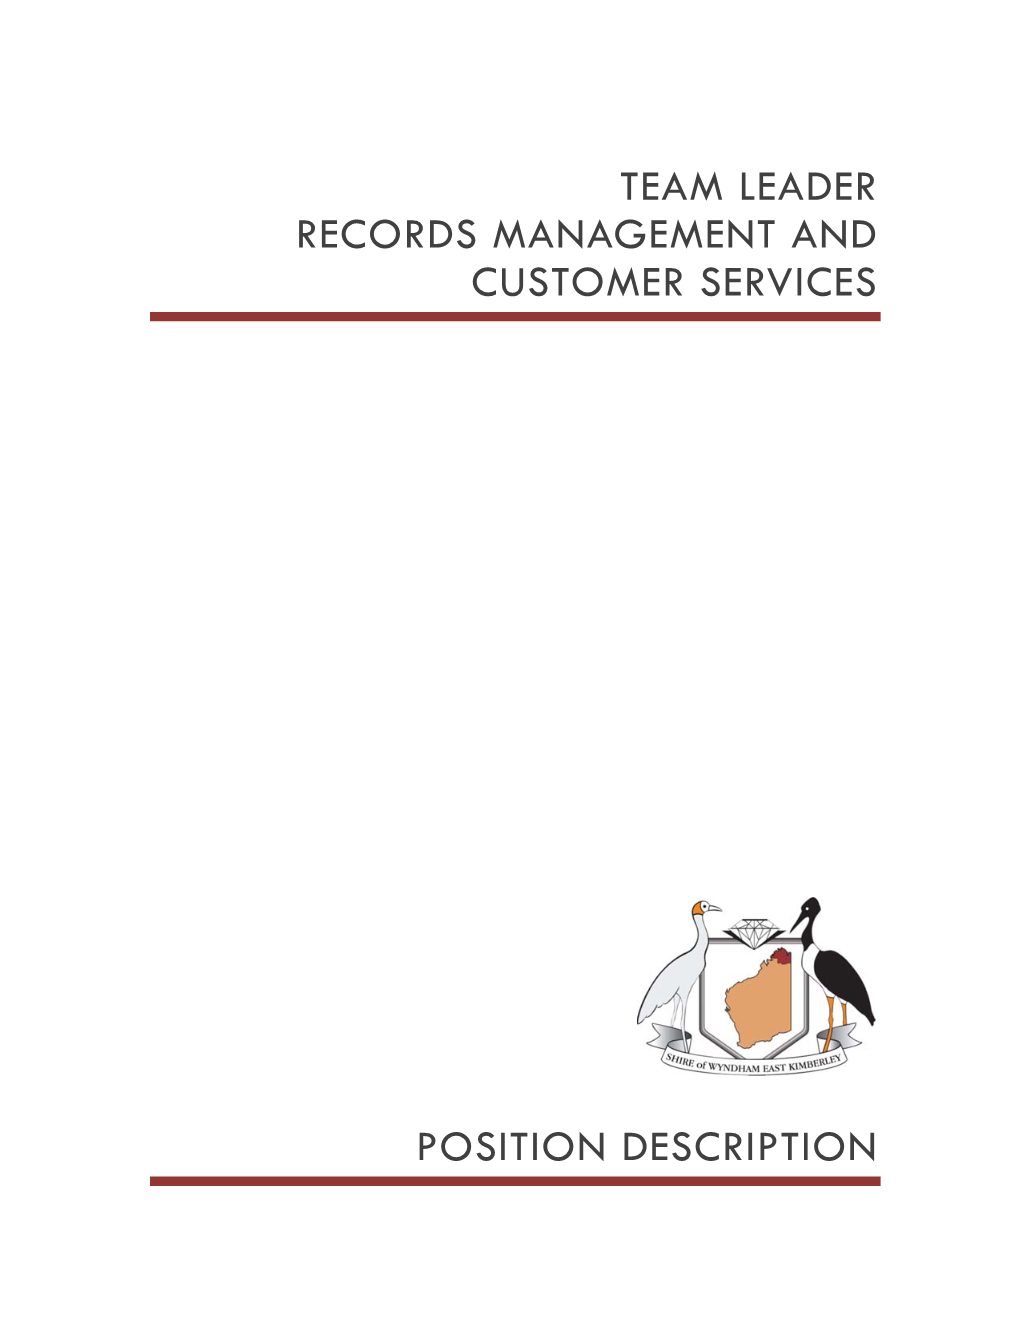 Team Leader Records Management and Customer Services